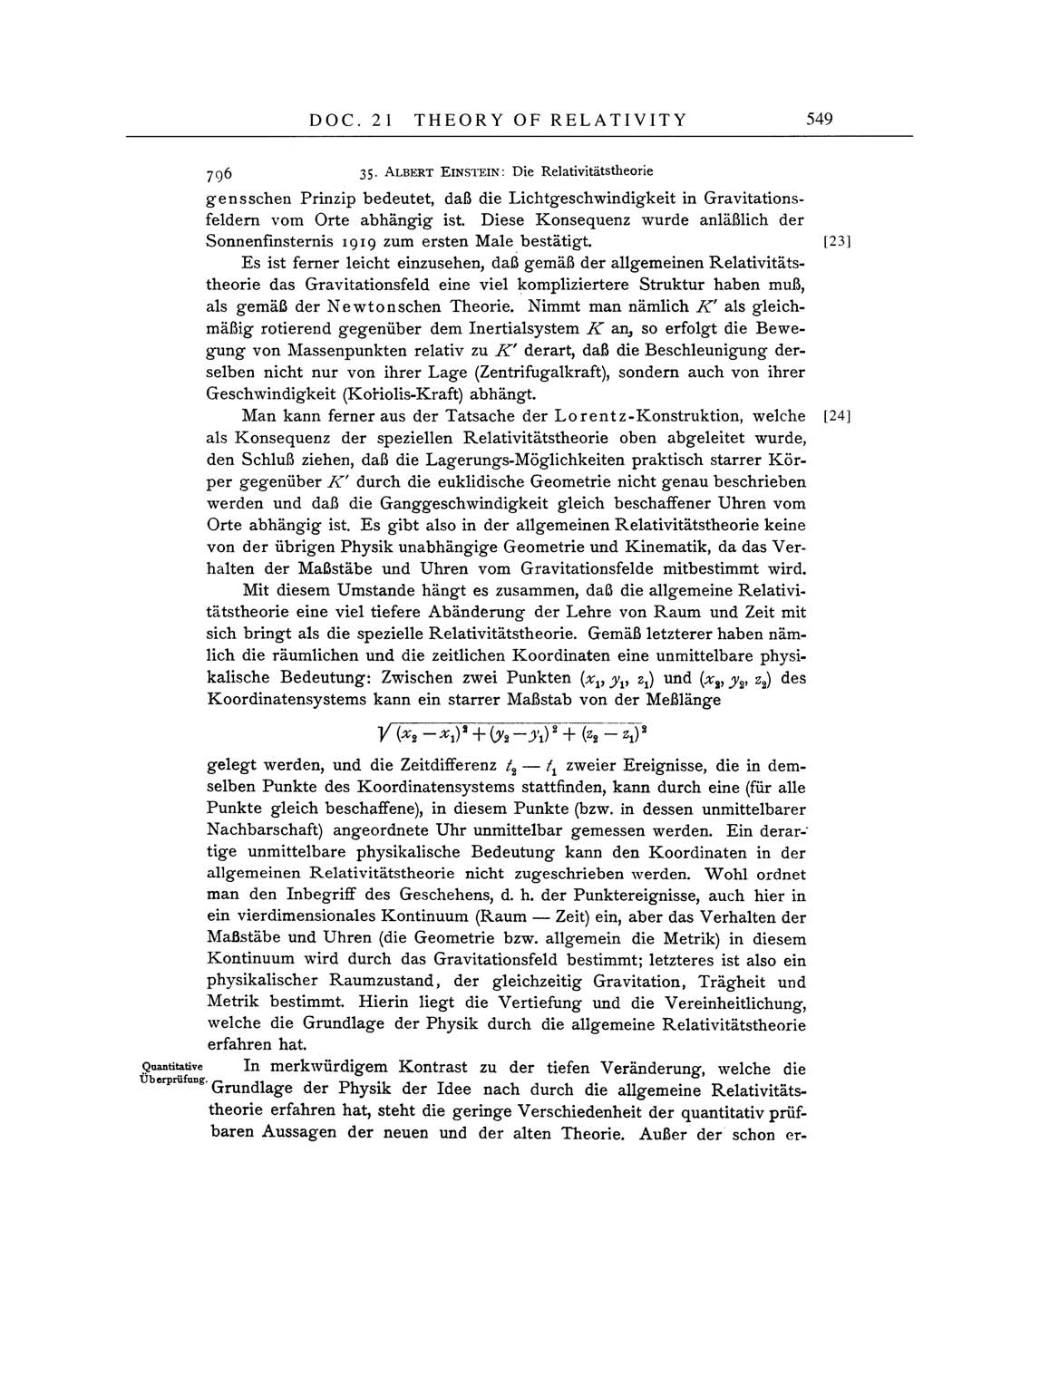 Volume 4: The Swiss Years: Writings 1912-1914 page 549